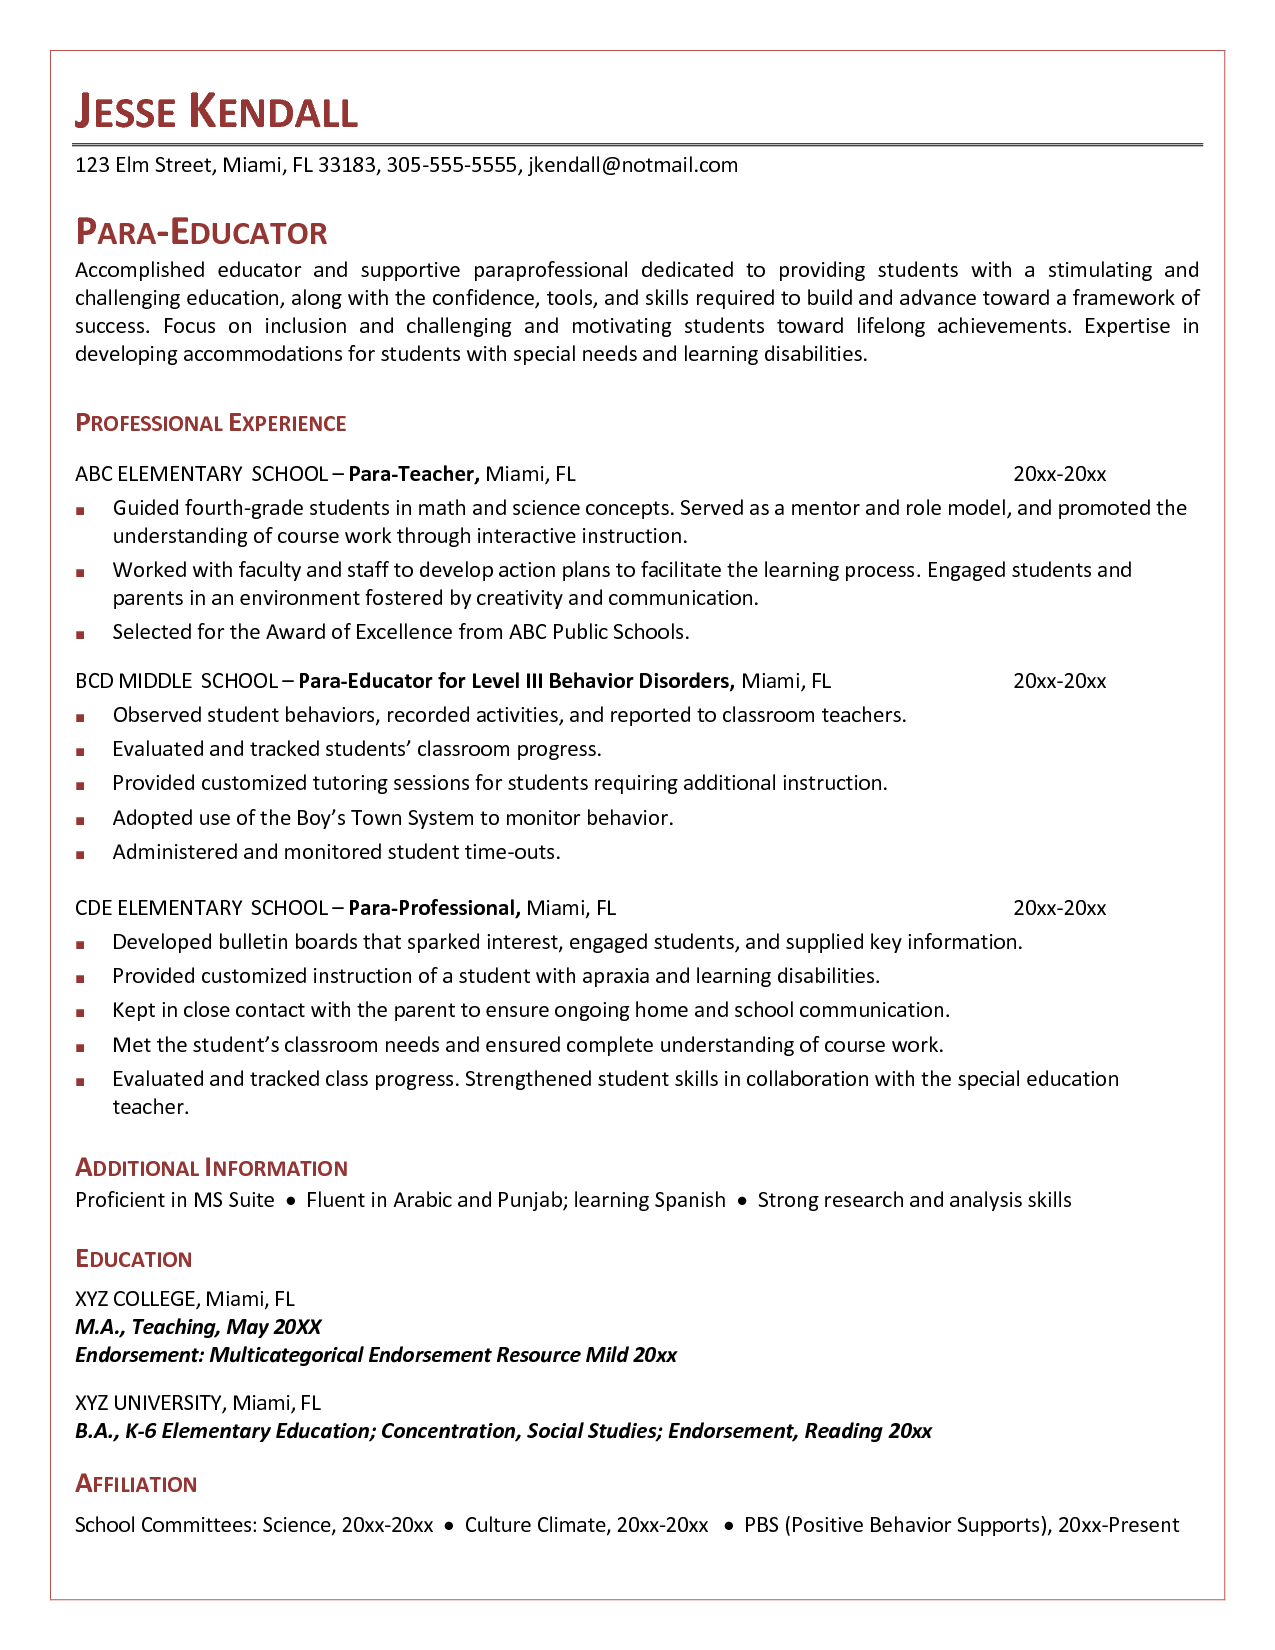 Cover Letter For Paraeducator Example Httpwww inside measurements 1275 X 1650